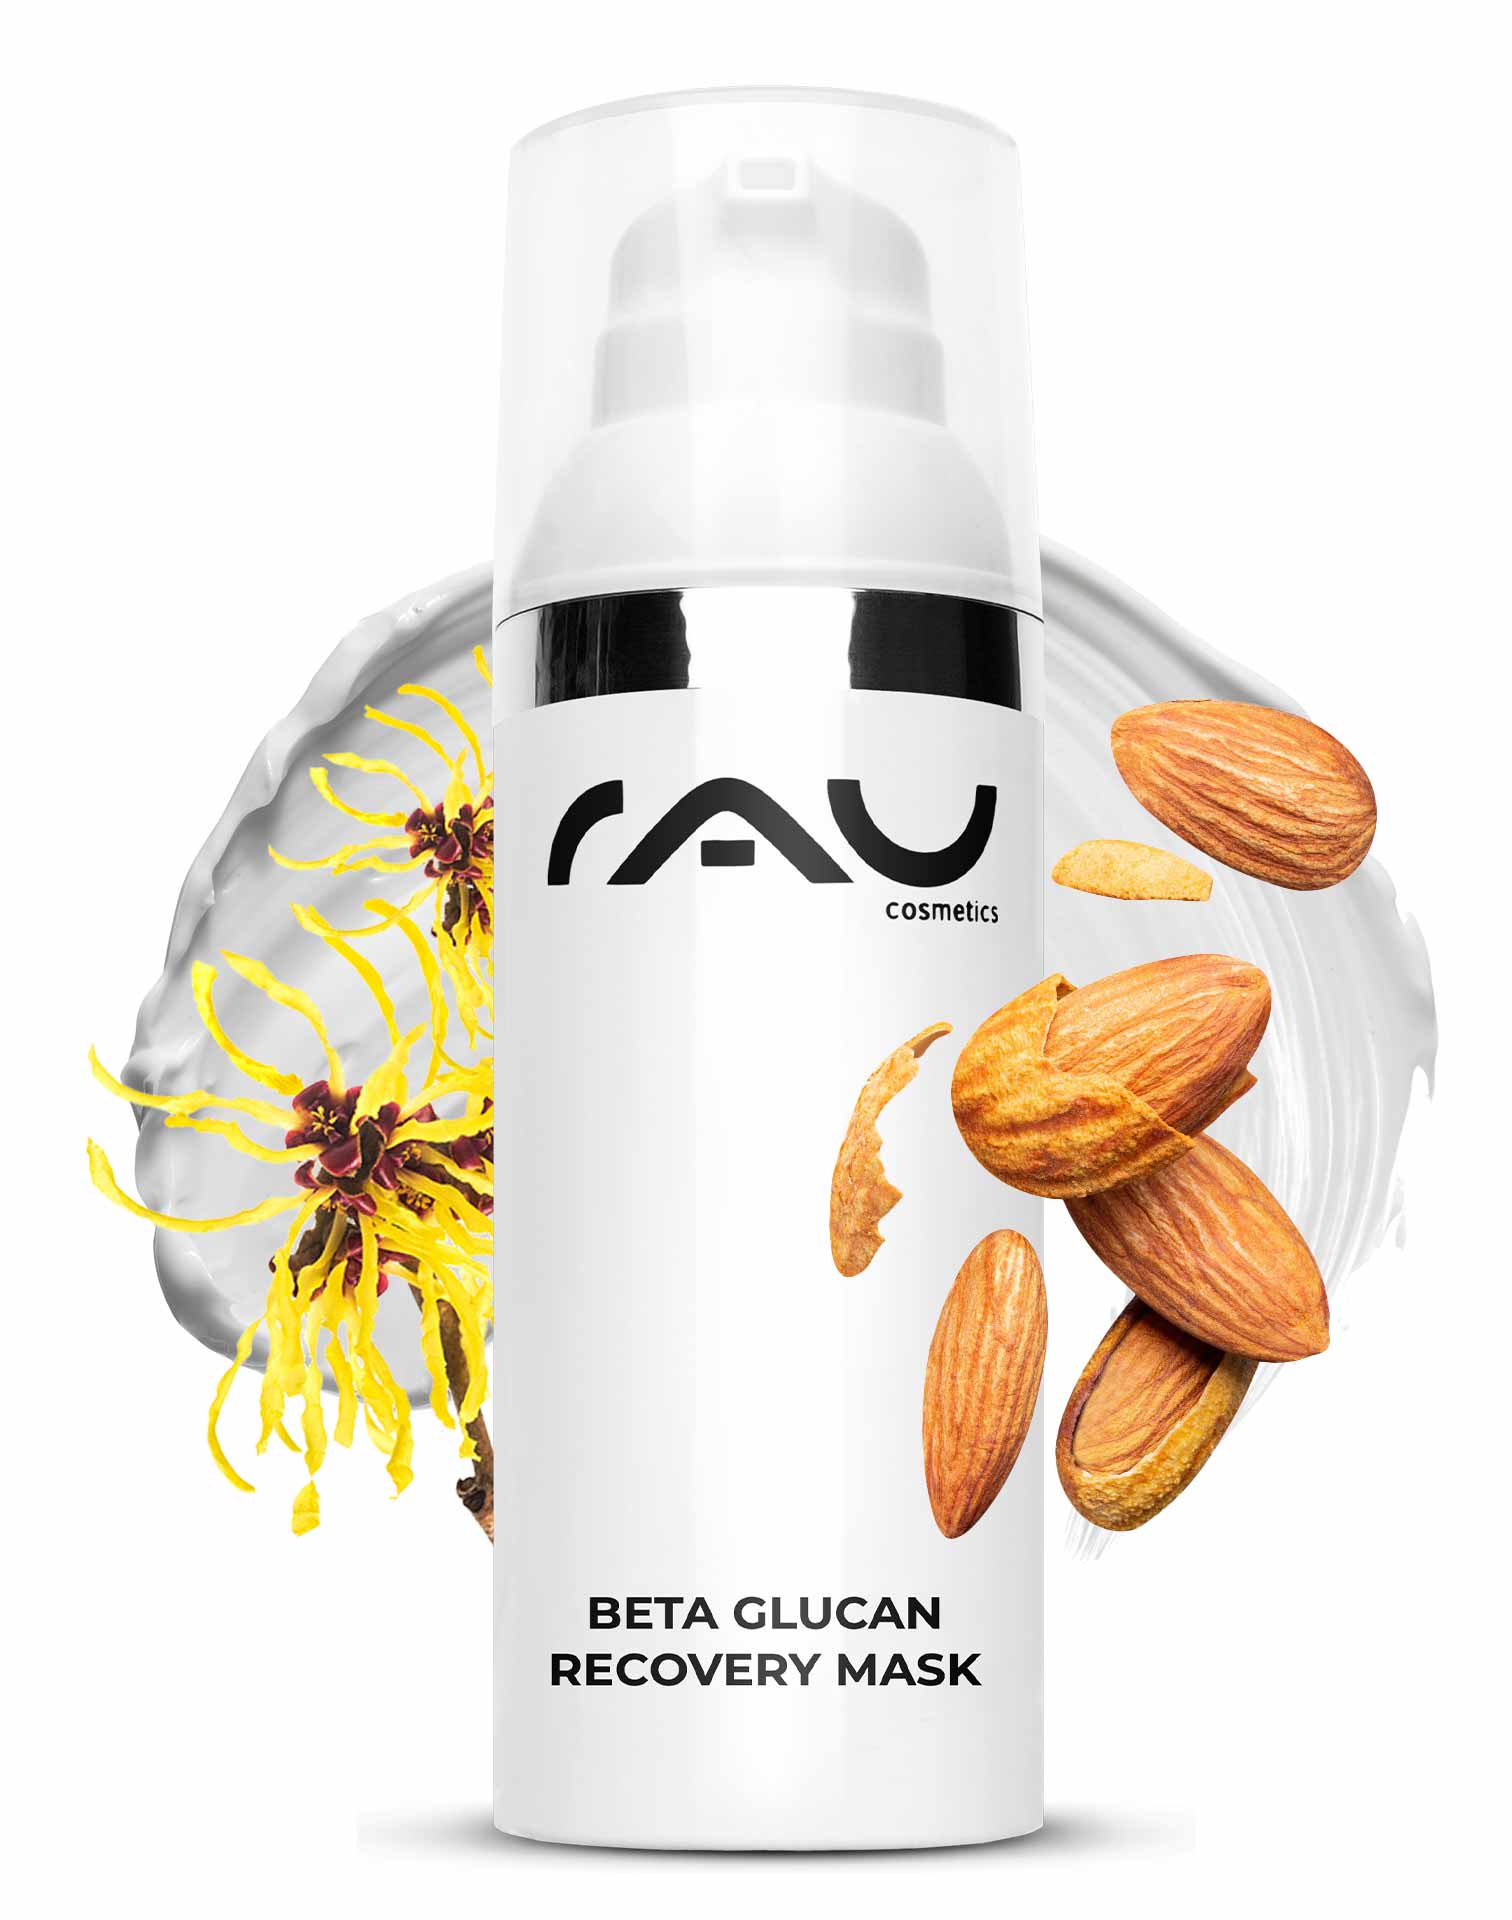 RAU Beta Glucan Recovery Mask 50 ml - Soothing Cream Mask for Stressed Skin